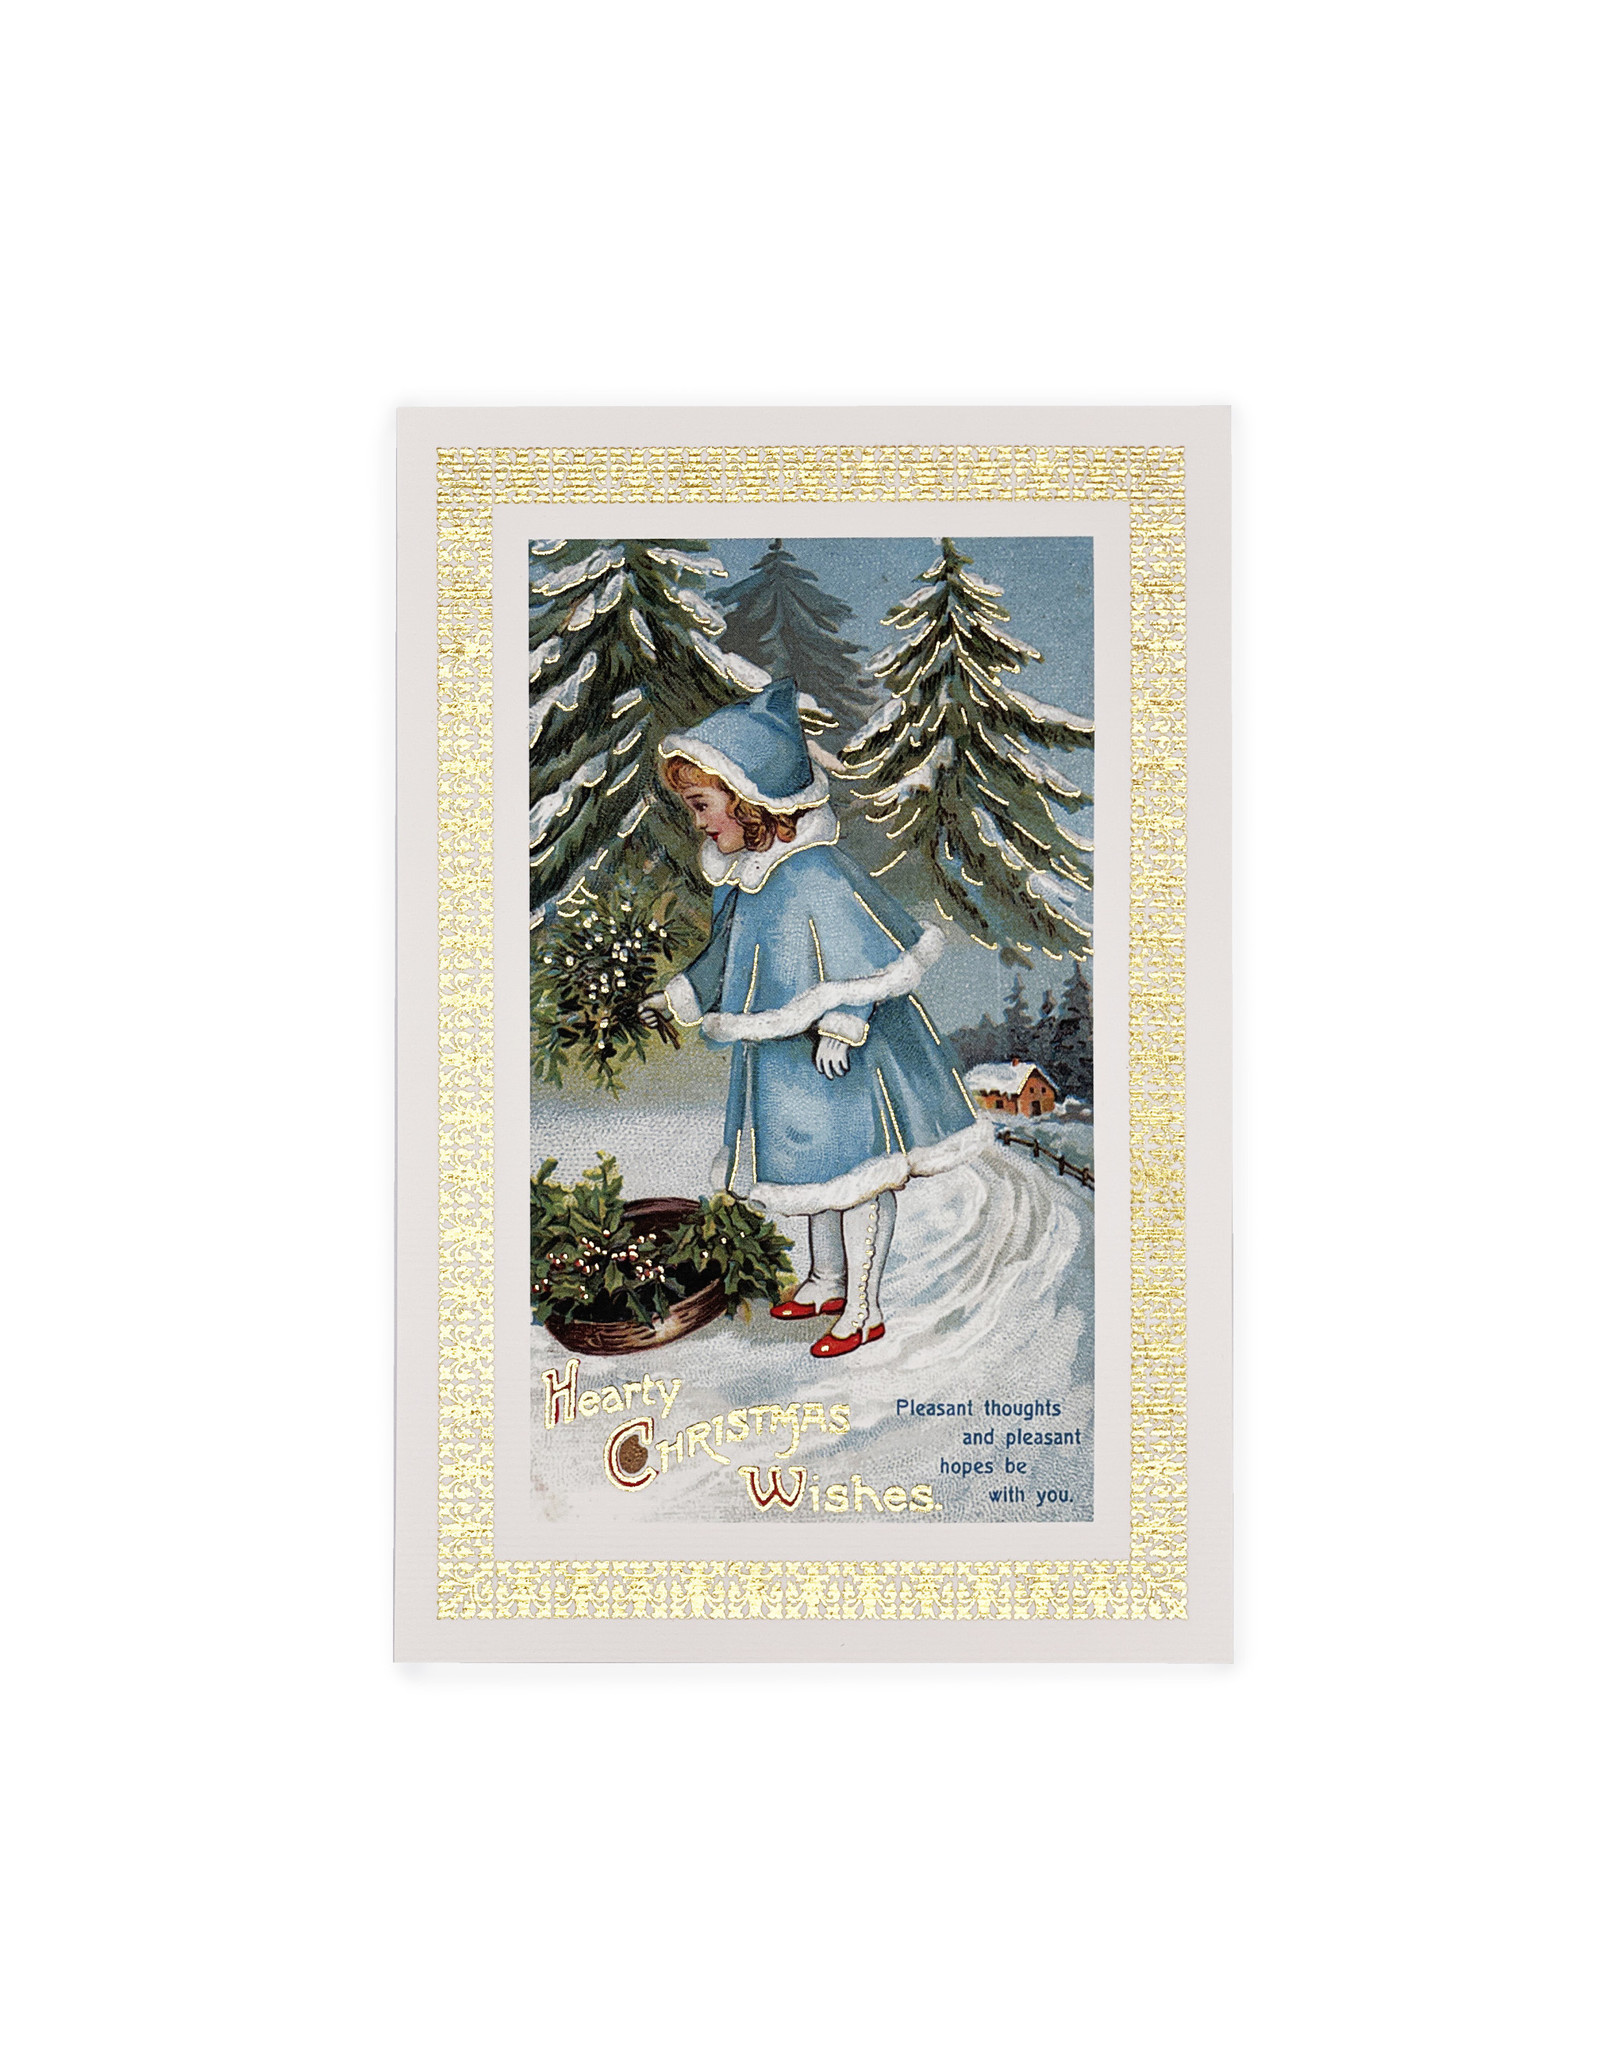 Rossi Hearty Christmas Wishes Girl in Blue Vintage Postcard